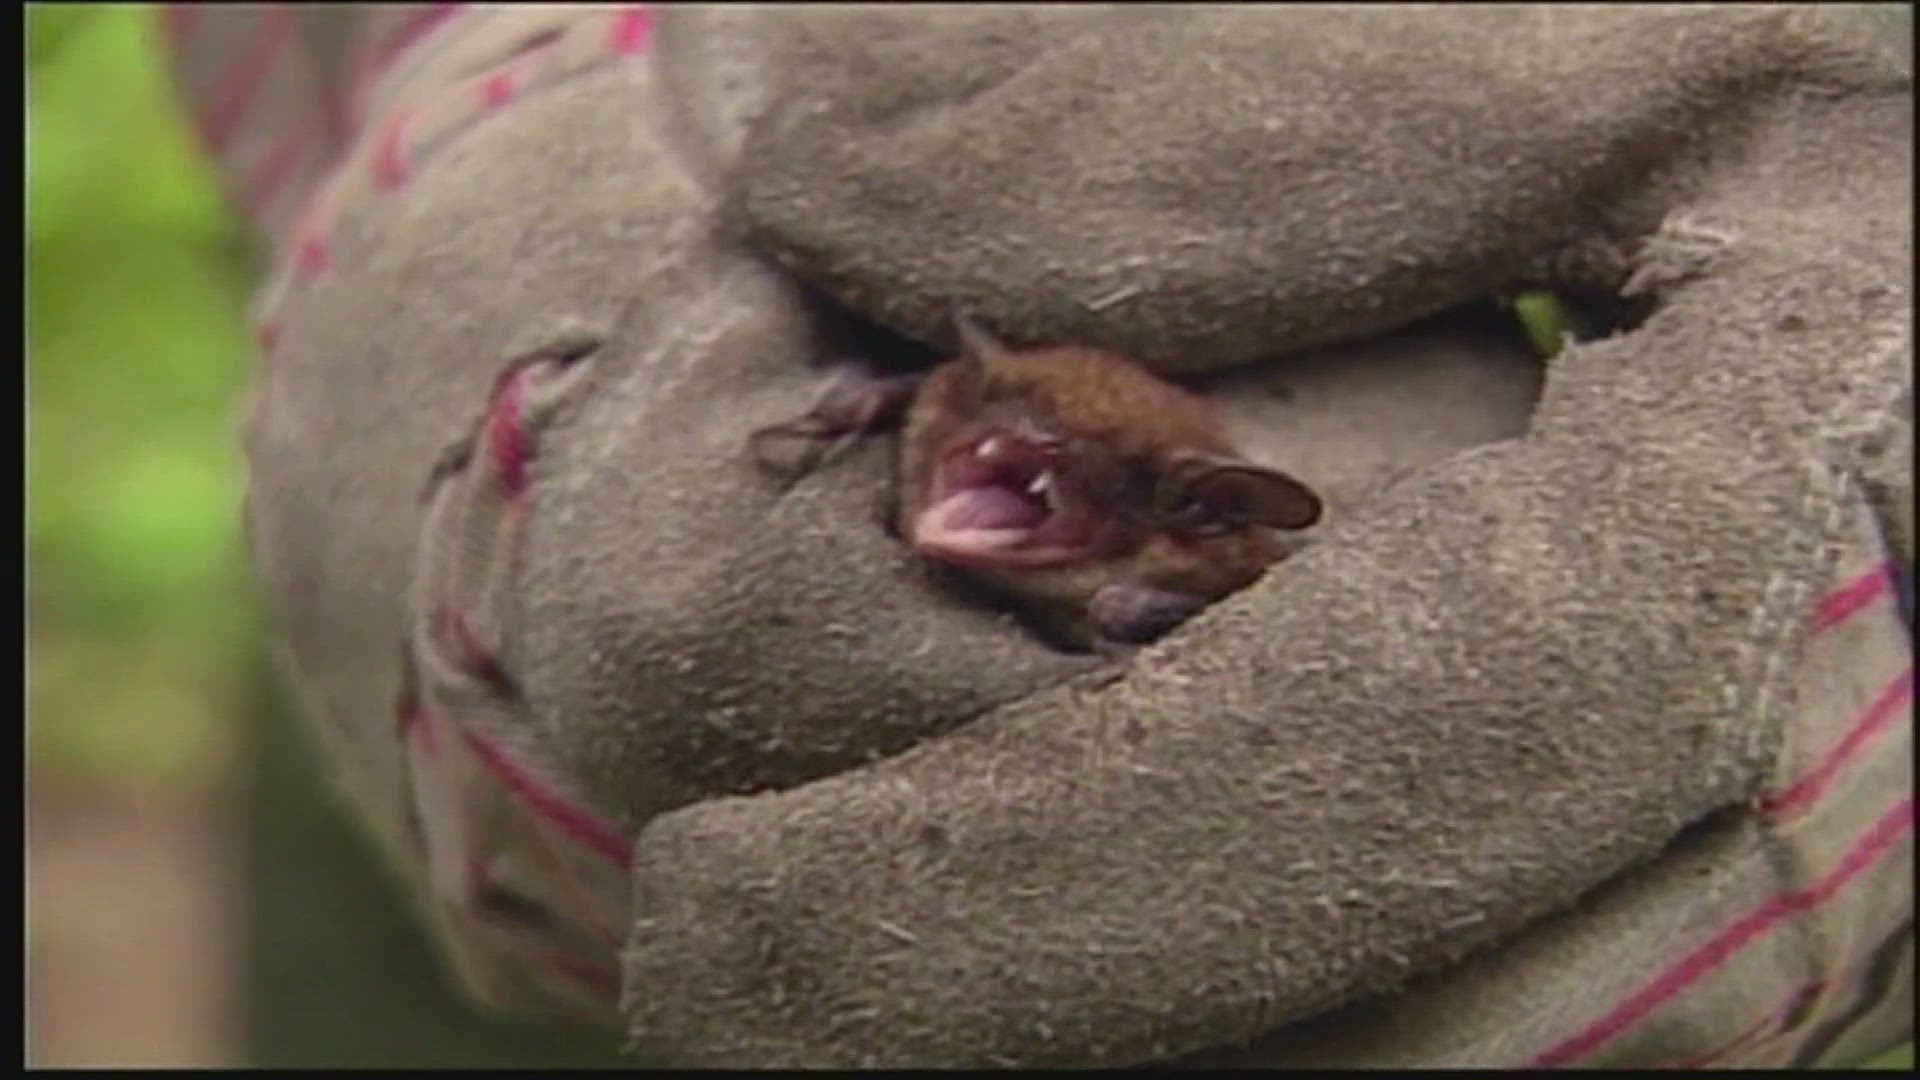 Scientists in Illinois recently discovered two bats with rabies in Cook and Will Counties. Officials want to remind residents to get their pets vaccinated.